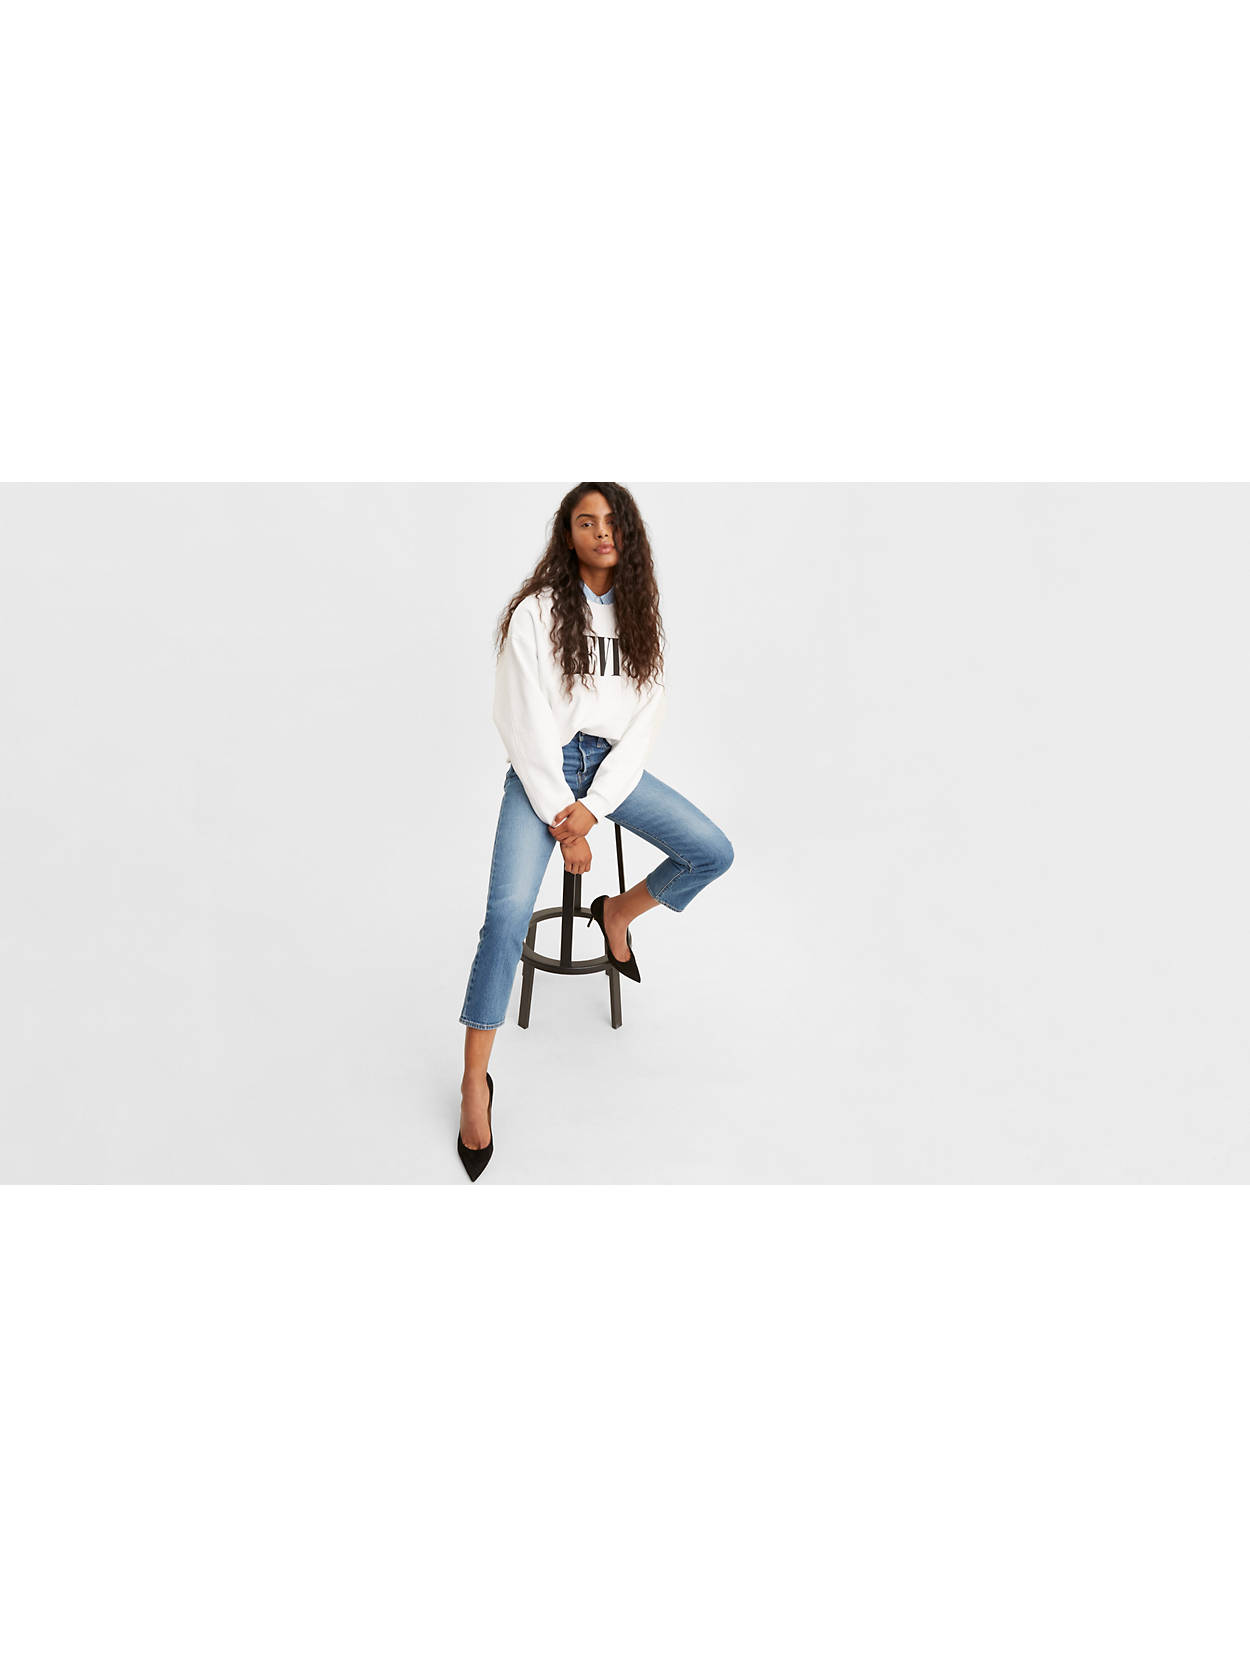 Levi’s: UP TO 75% OFF CLOSEOUT STYLES